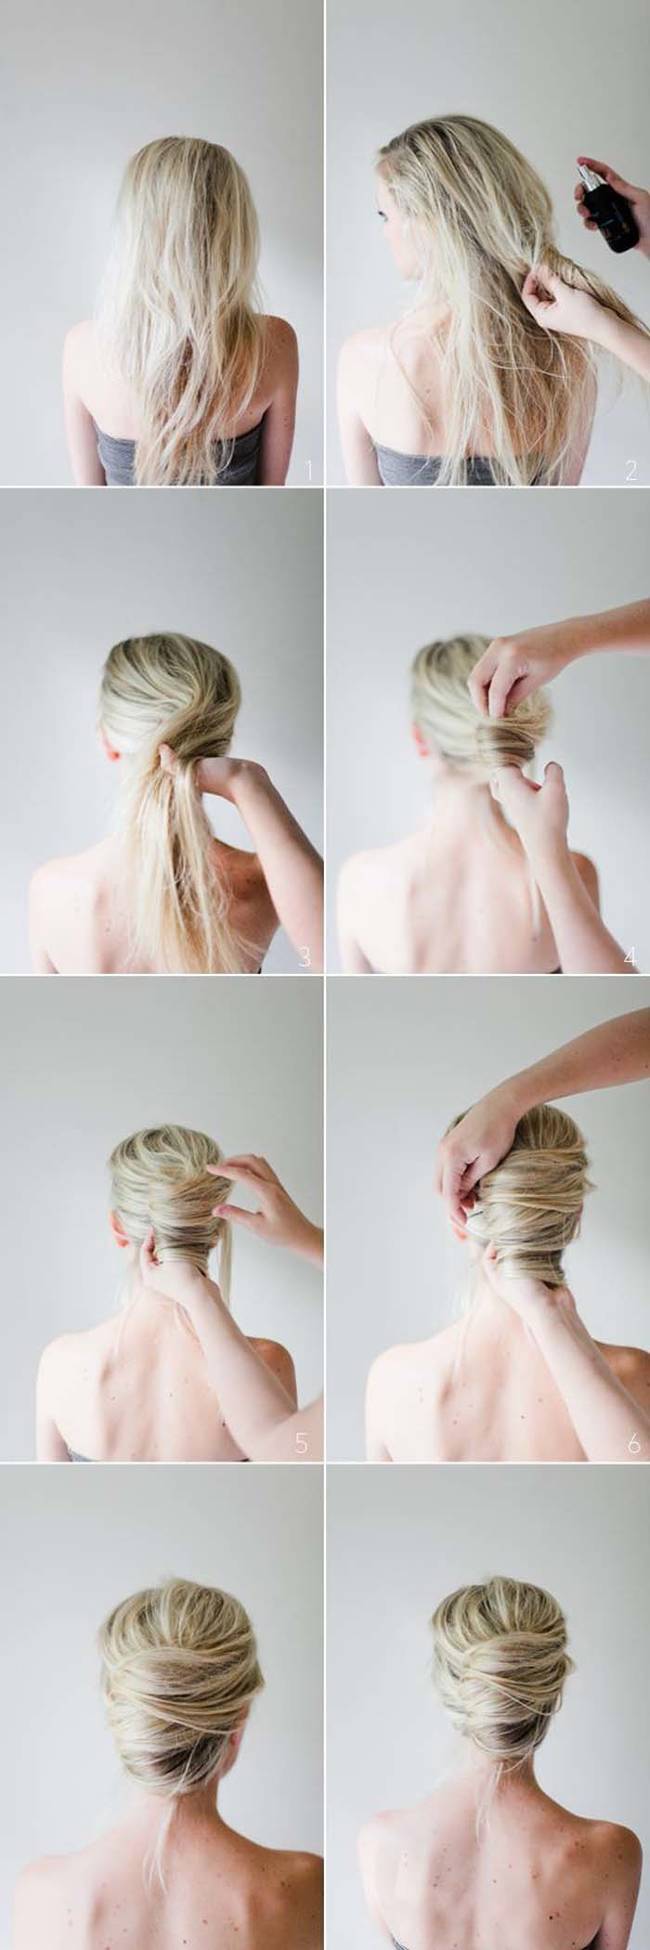 1420032714163519 8 Adorable Holiday Worthy Hairstyles For Every Hair Length